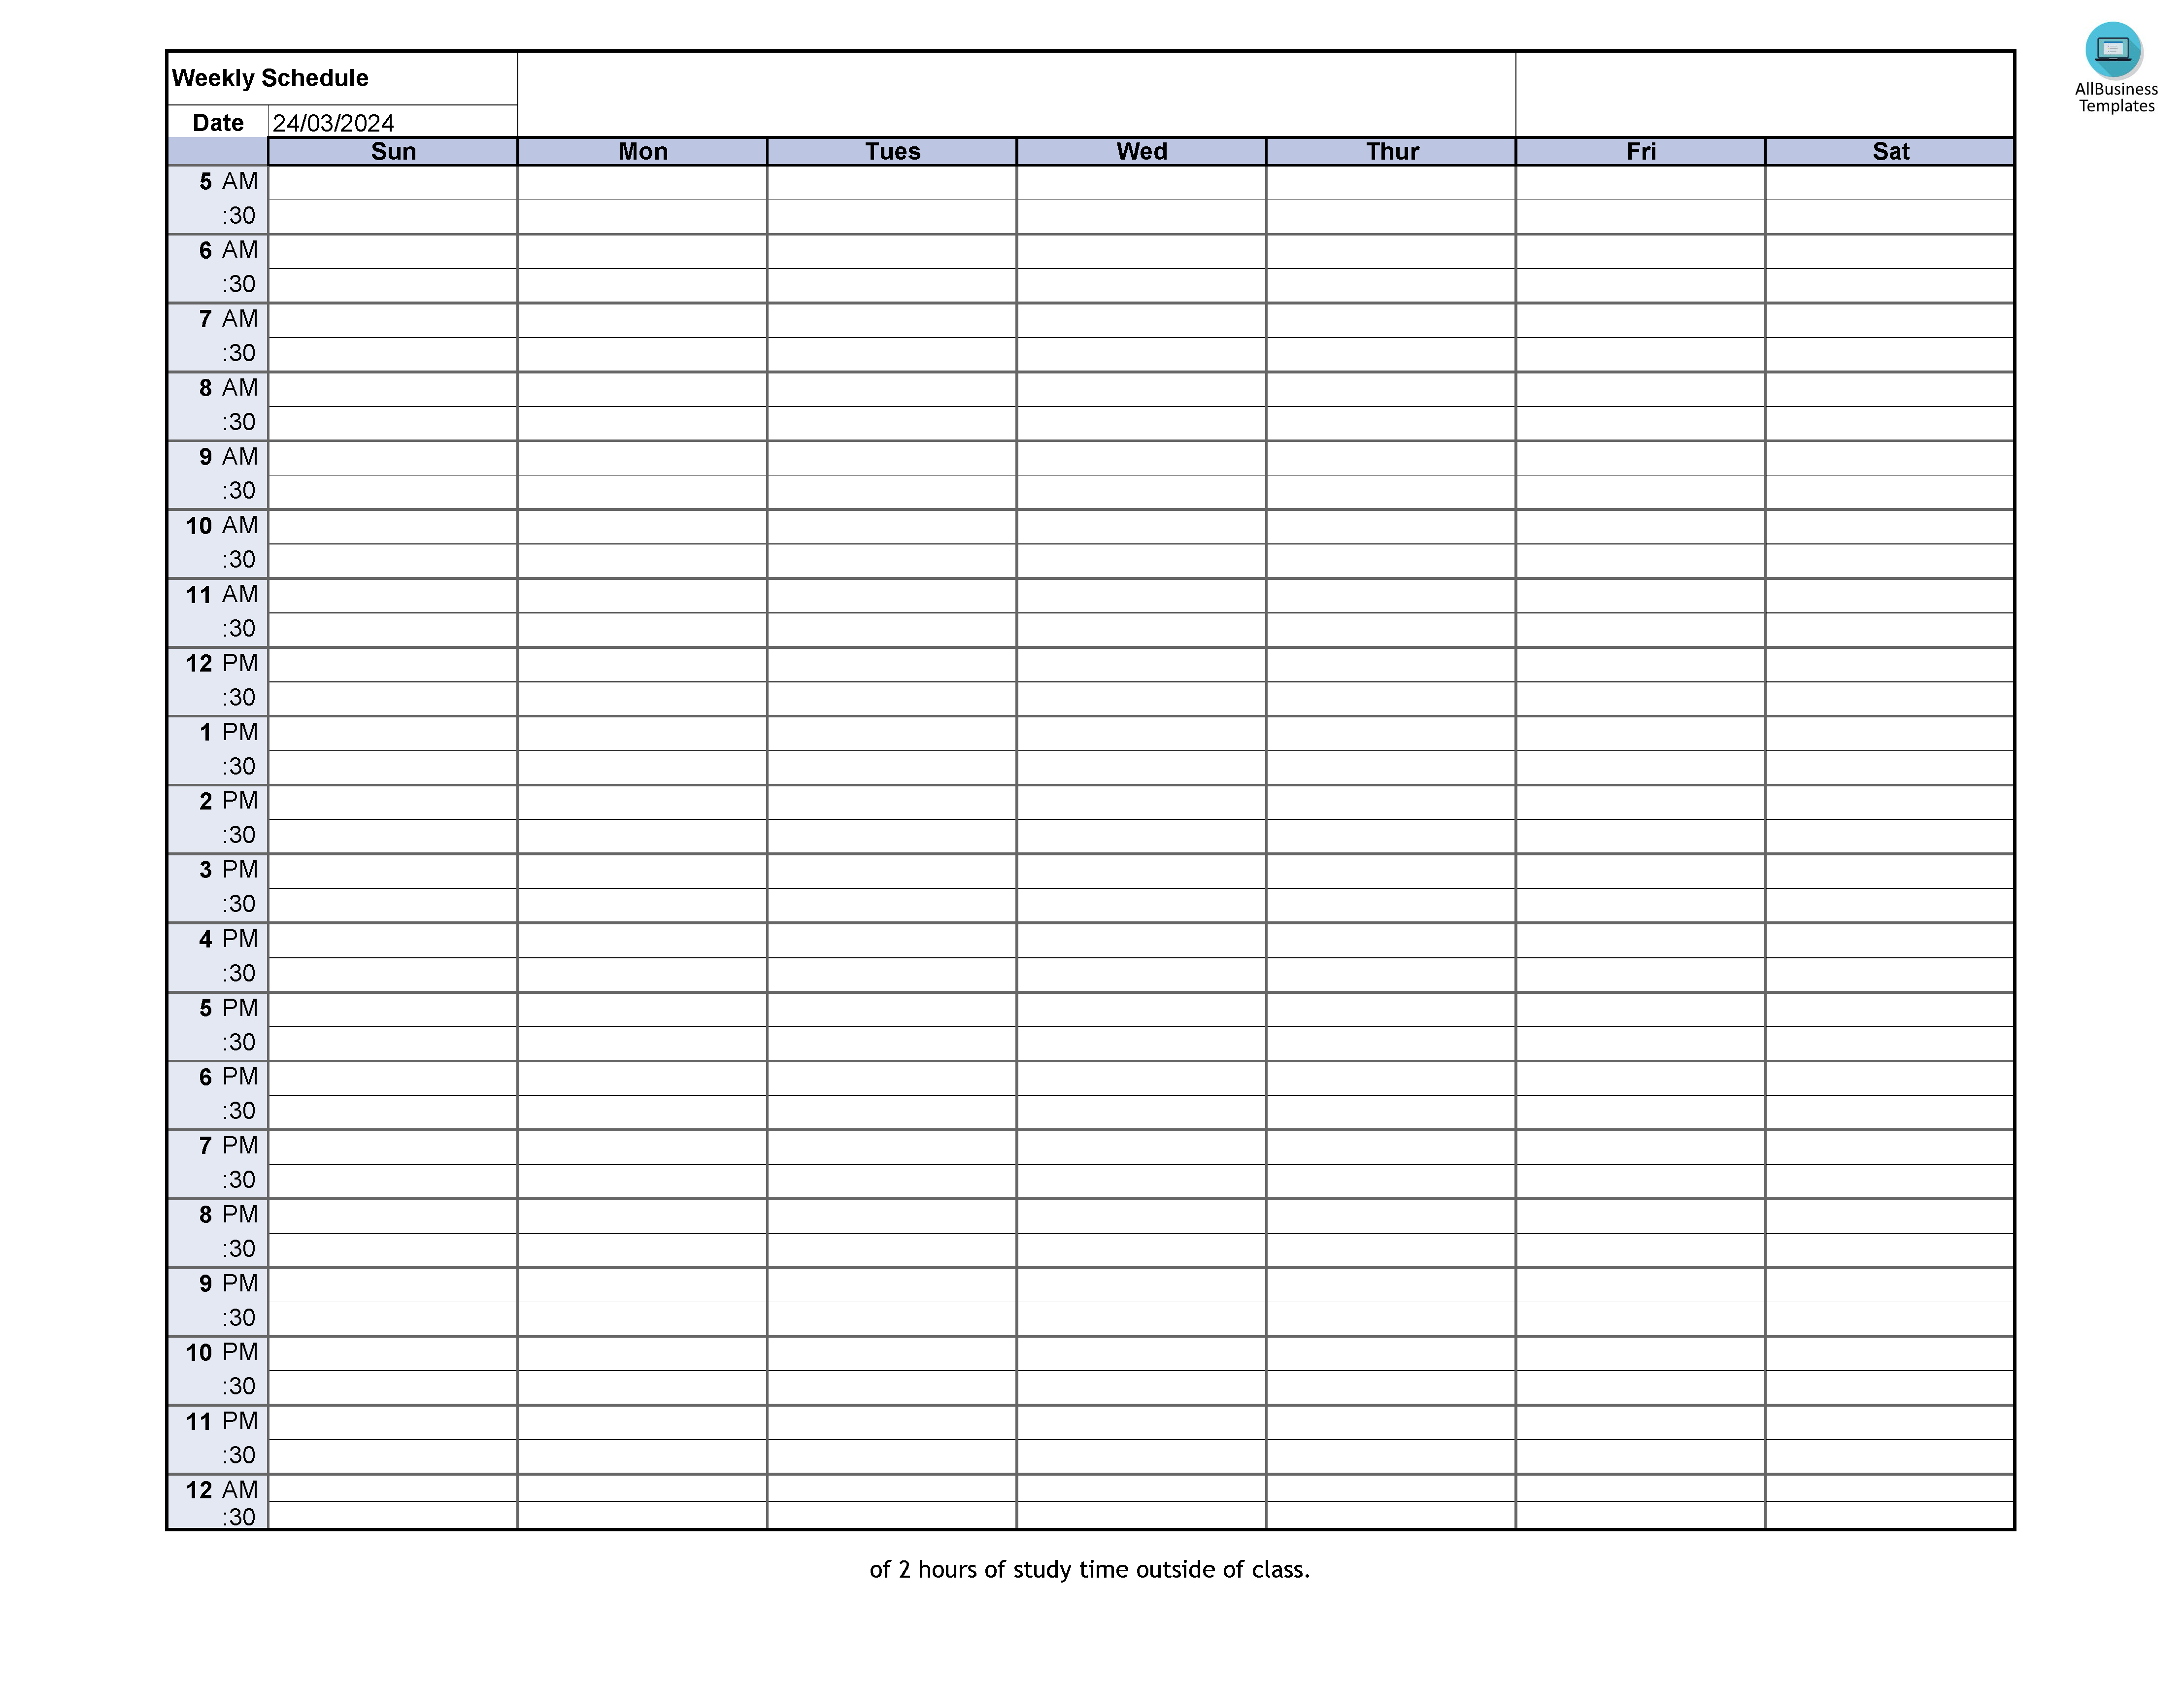 Excel Weekly Schedule Templates At Allbusinesstemplates Com